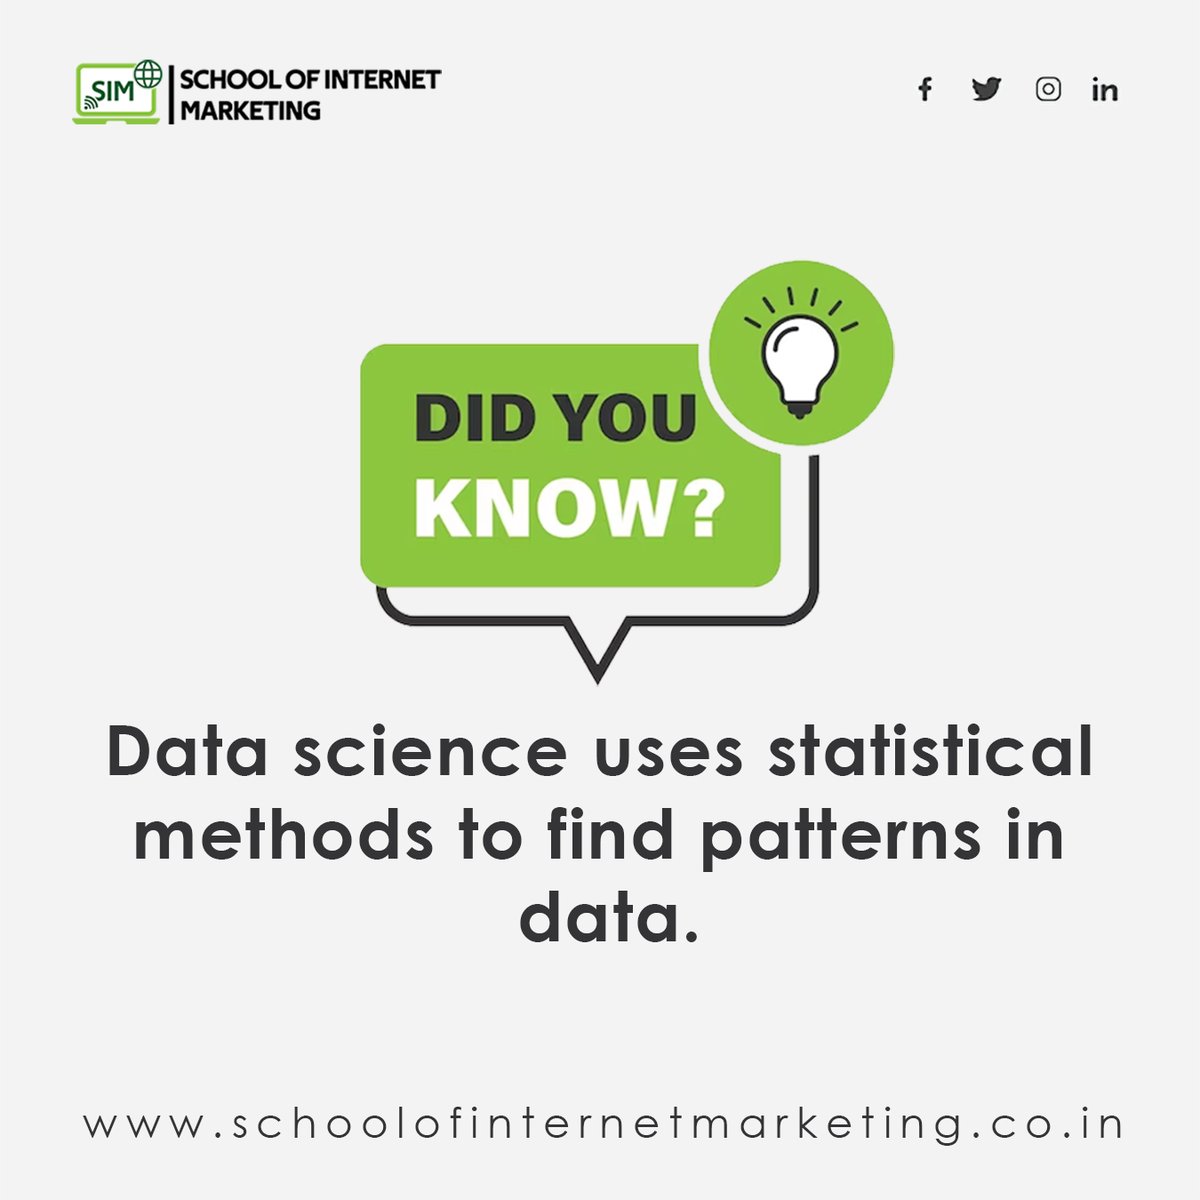 🤔Did You Know?
👉Data Science Uses Statistical Methods To Find Patterns in Data.

#DidYouKnow #didyouknow #DidYouKnowThis #didyouknowthat #didyouknowgram #didyouknowfacts #didyouknowdaily  #datascience #datasciencejobs #datasciencecourse #AI #ai #machinelearning #GenerativeAI